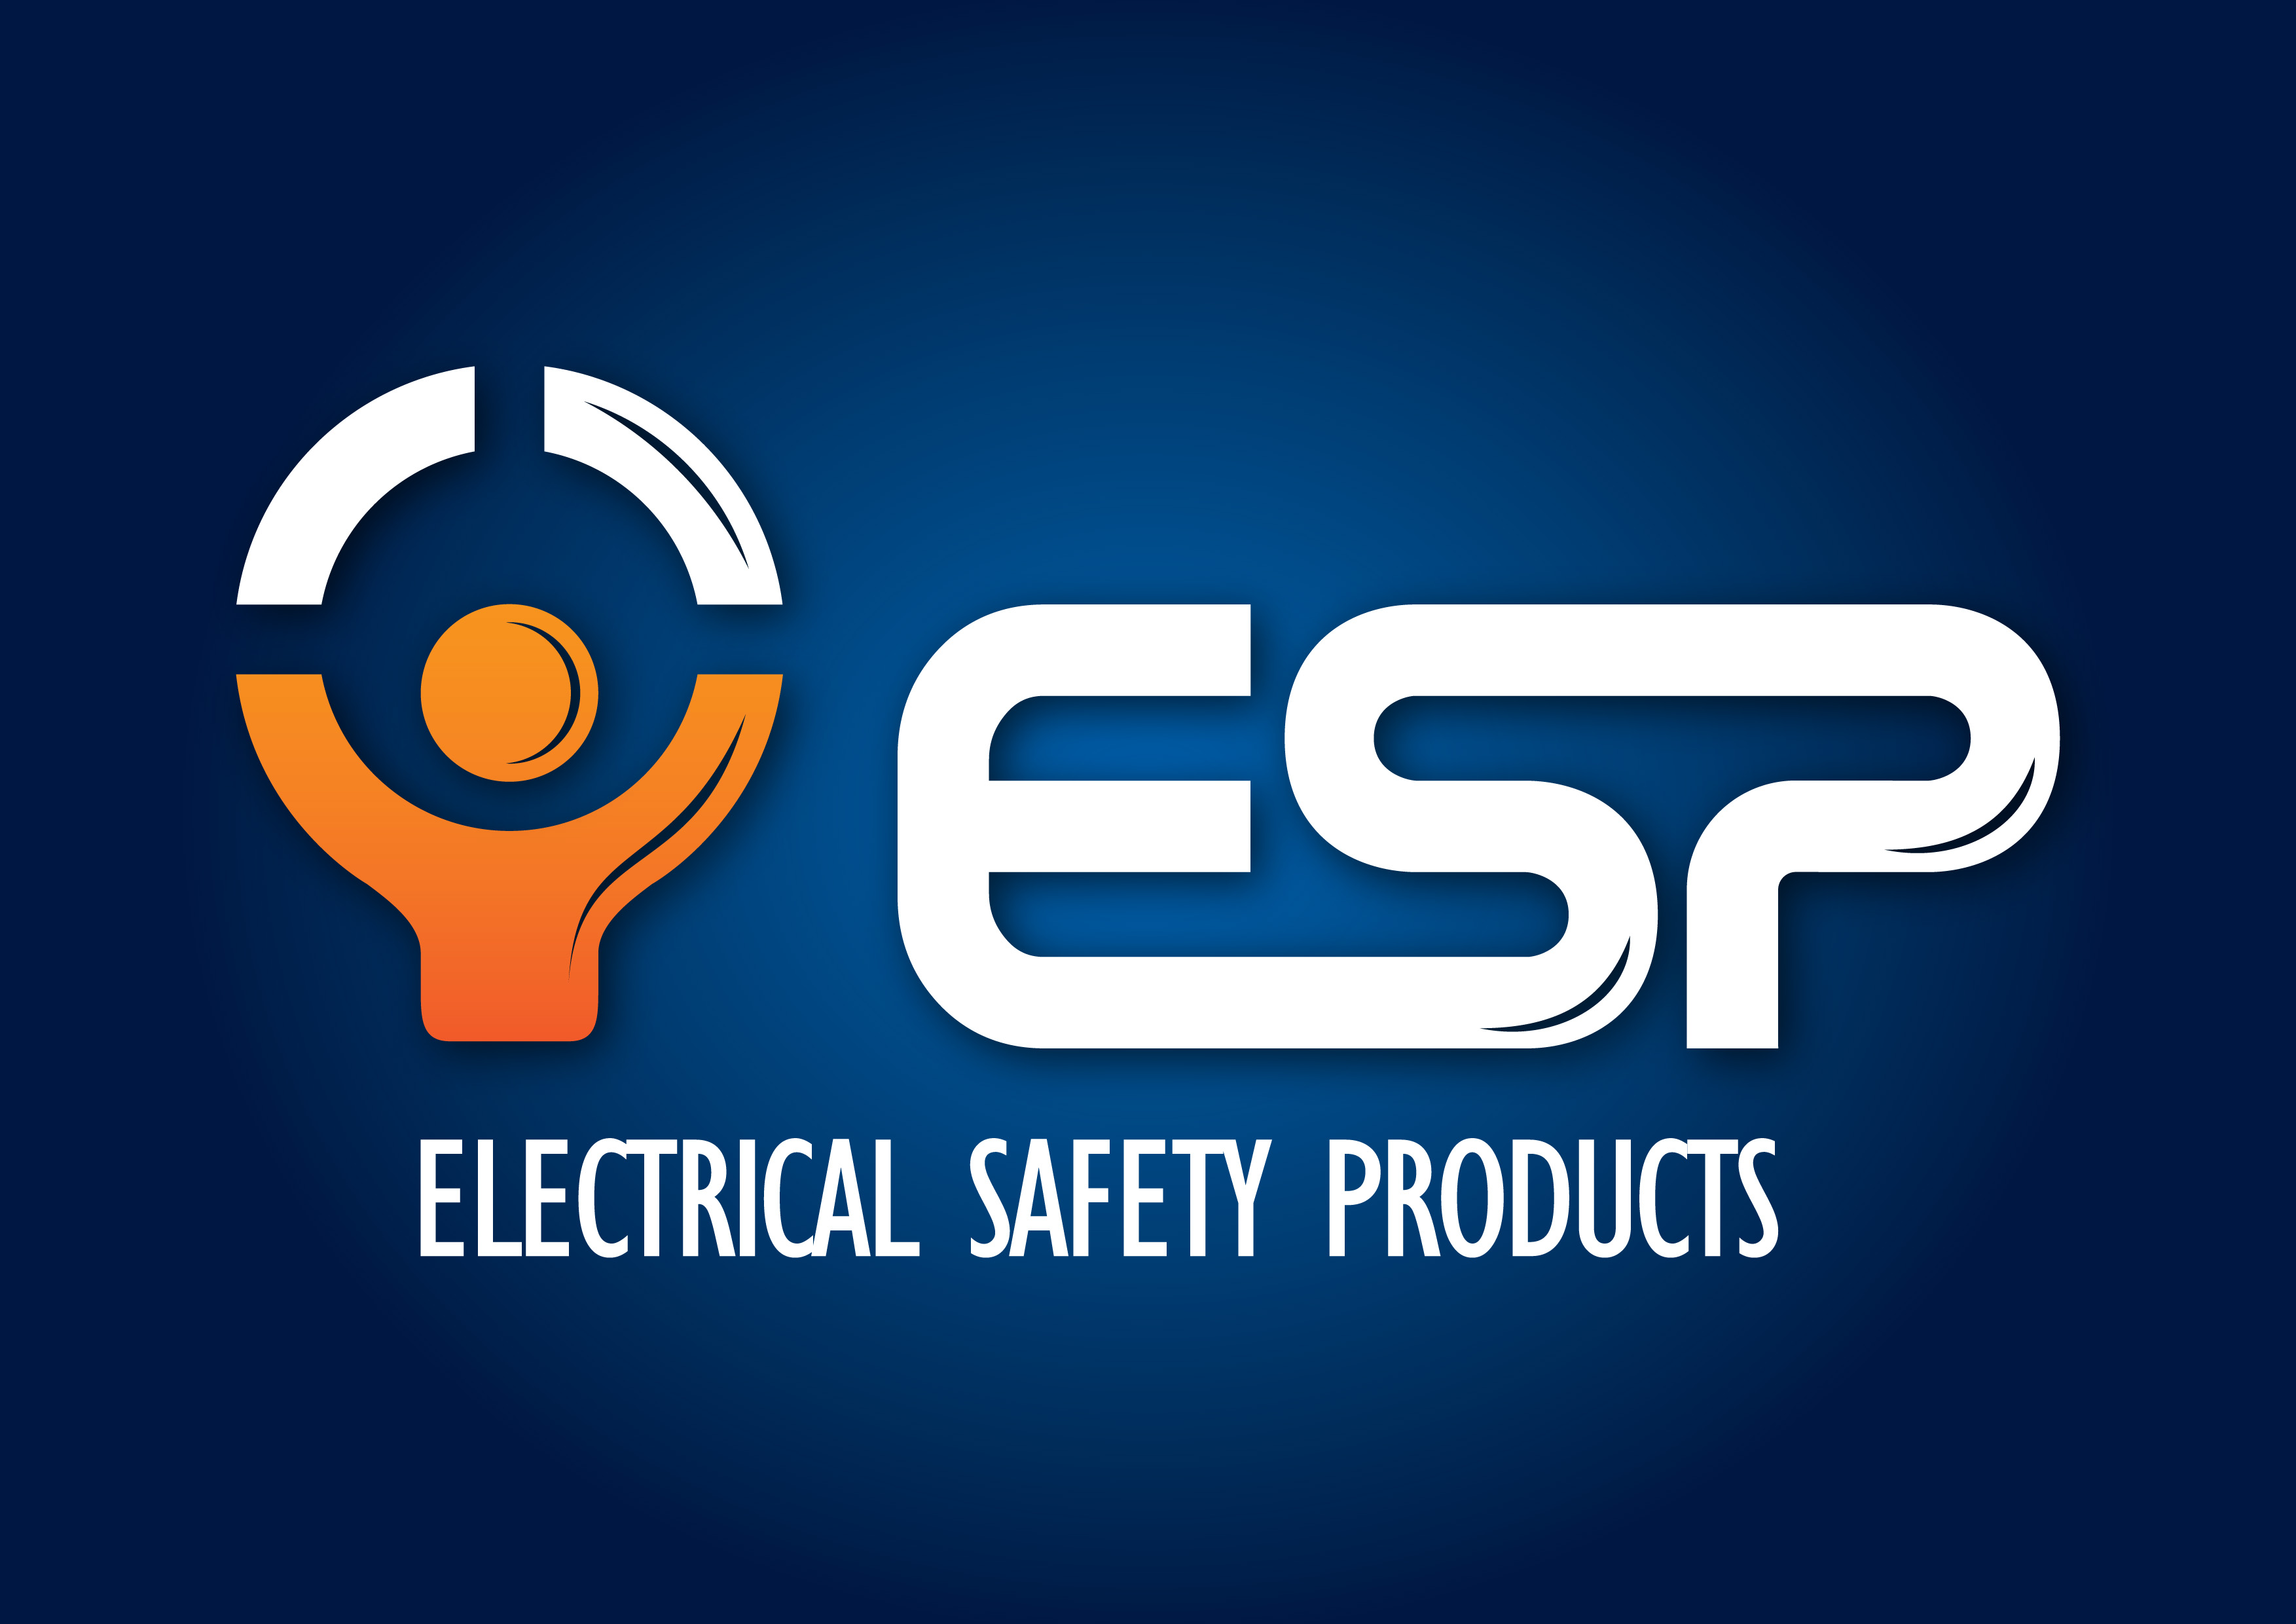 Electrical safety products